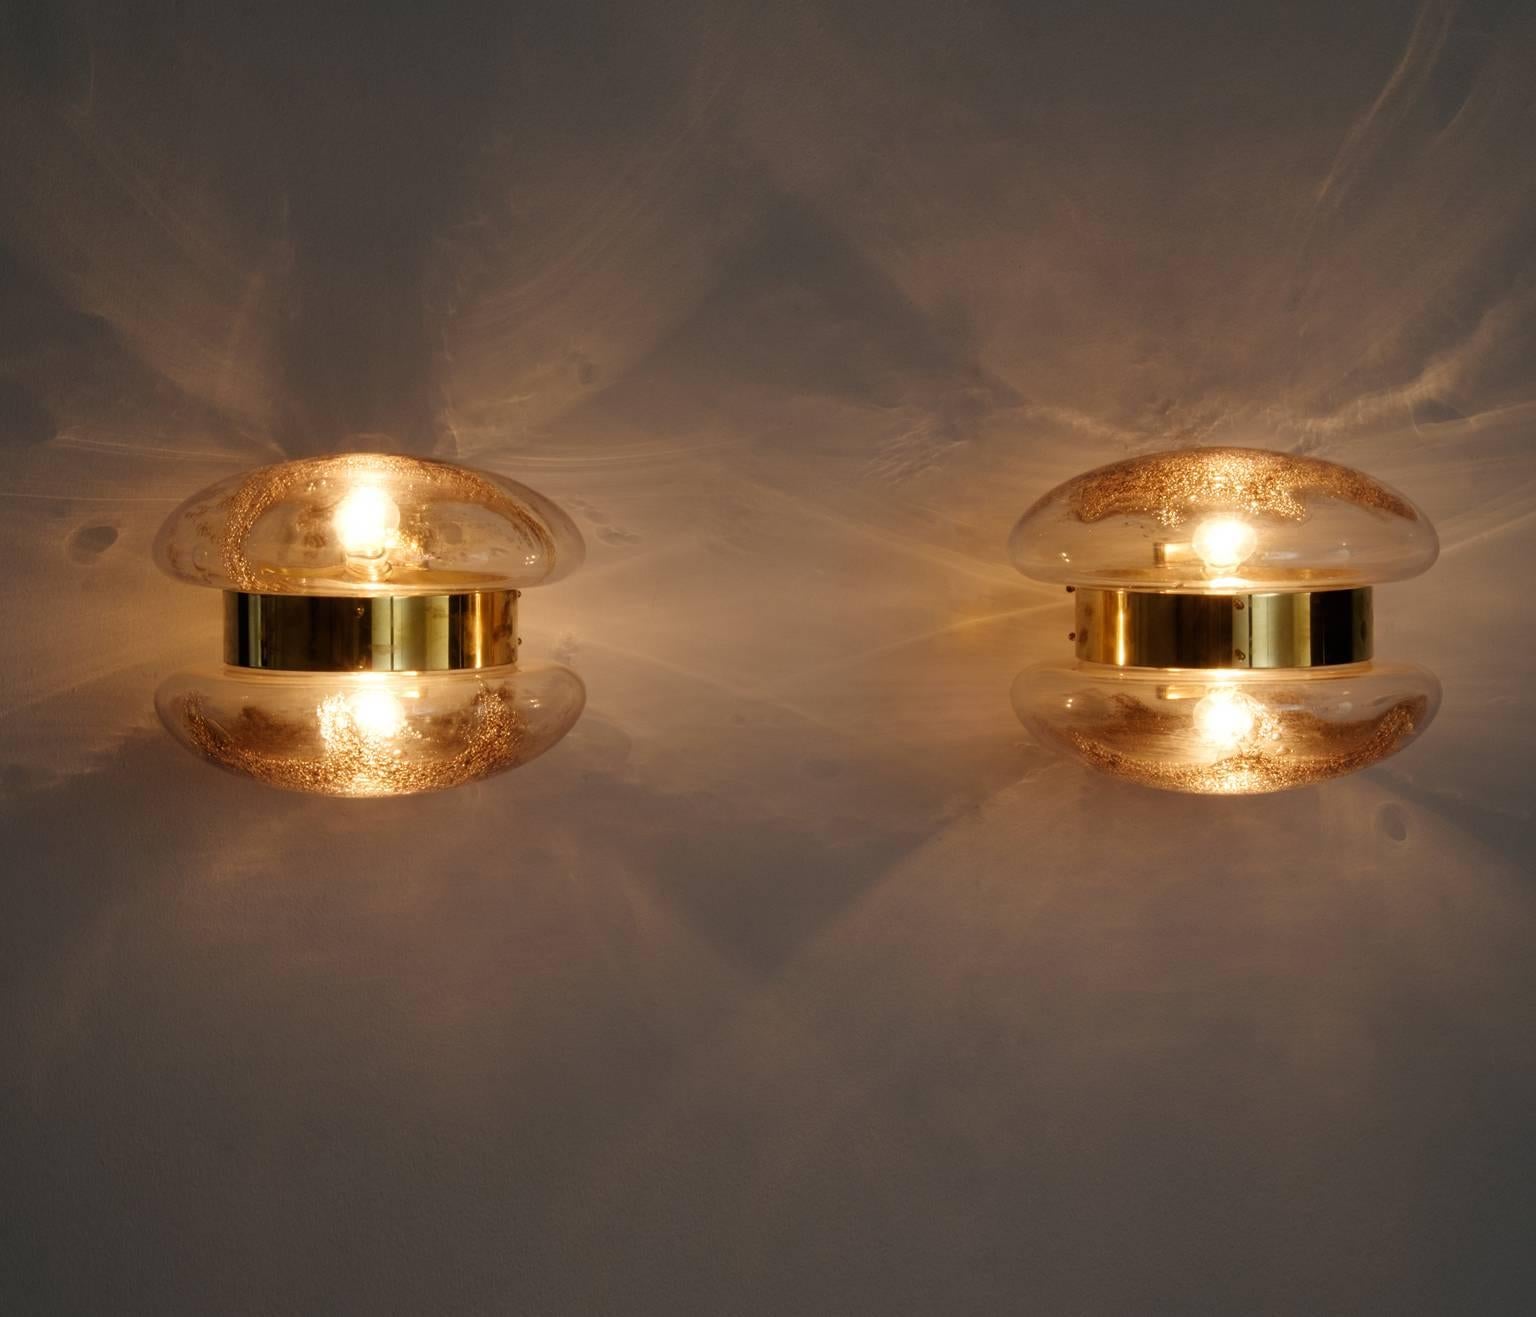 Pair of wall lamps, in brass and art glass, Italy, 1950s.

Stunning pair of wall lights. These wall-mounted sconces have an incredible appearance. The glass shades on both sides are beautifully shaped and show an interesting structure in the glass.